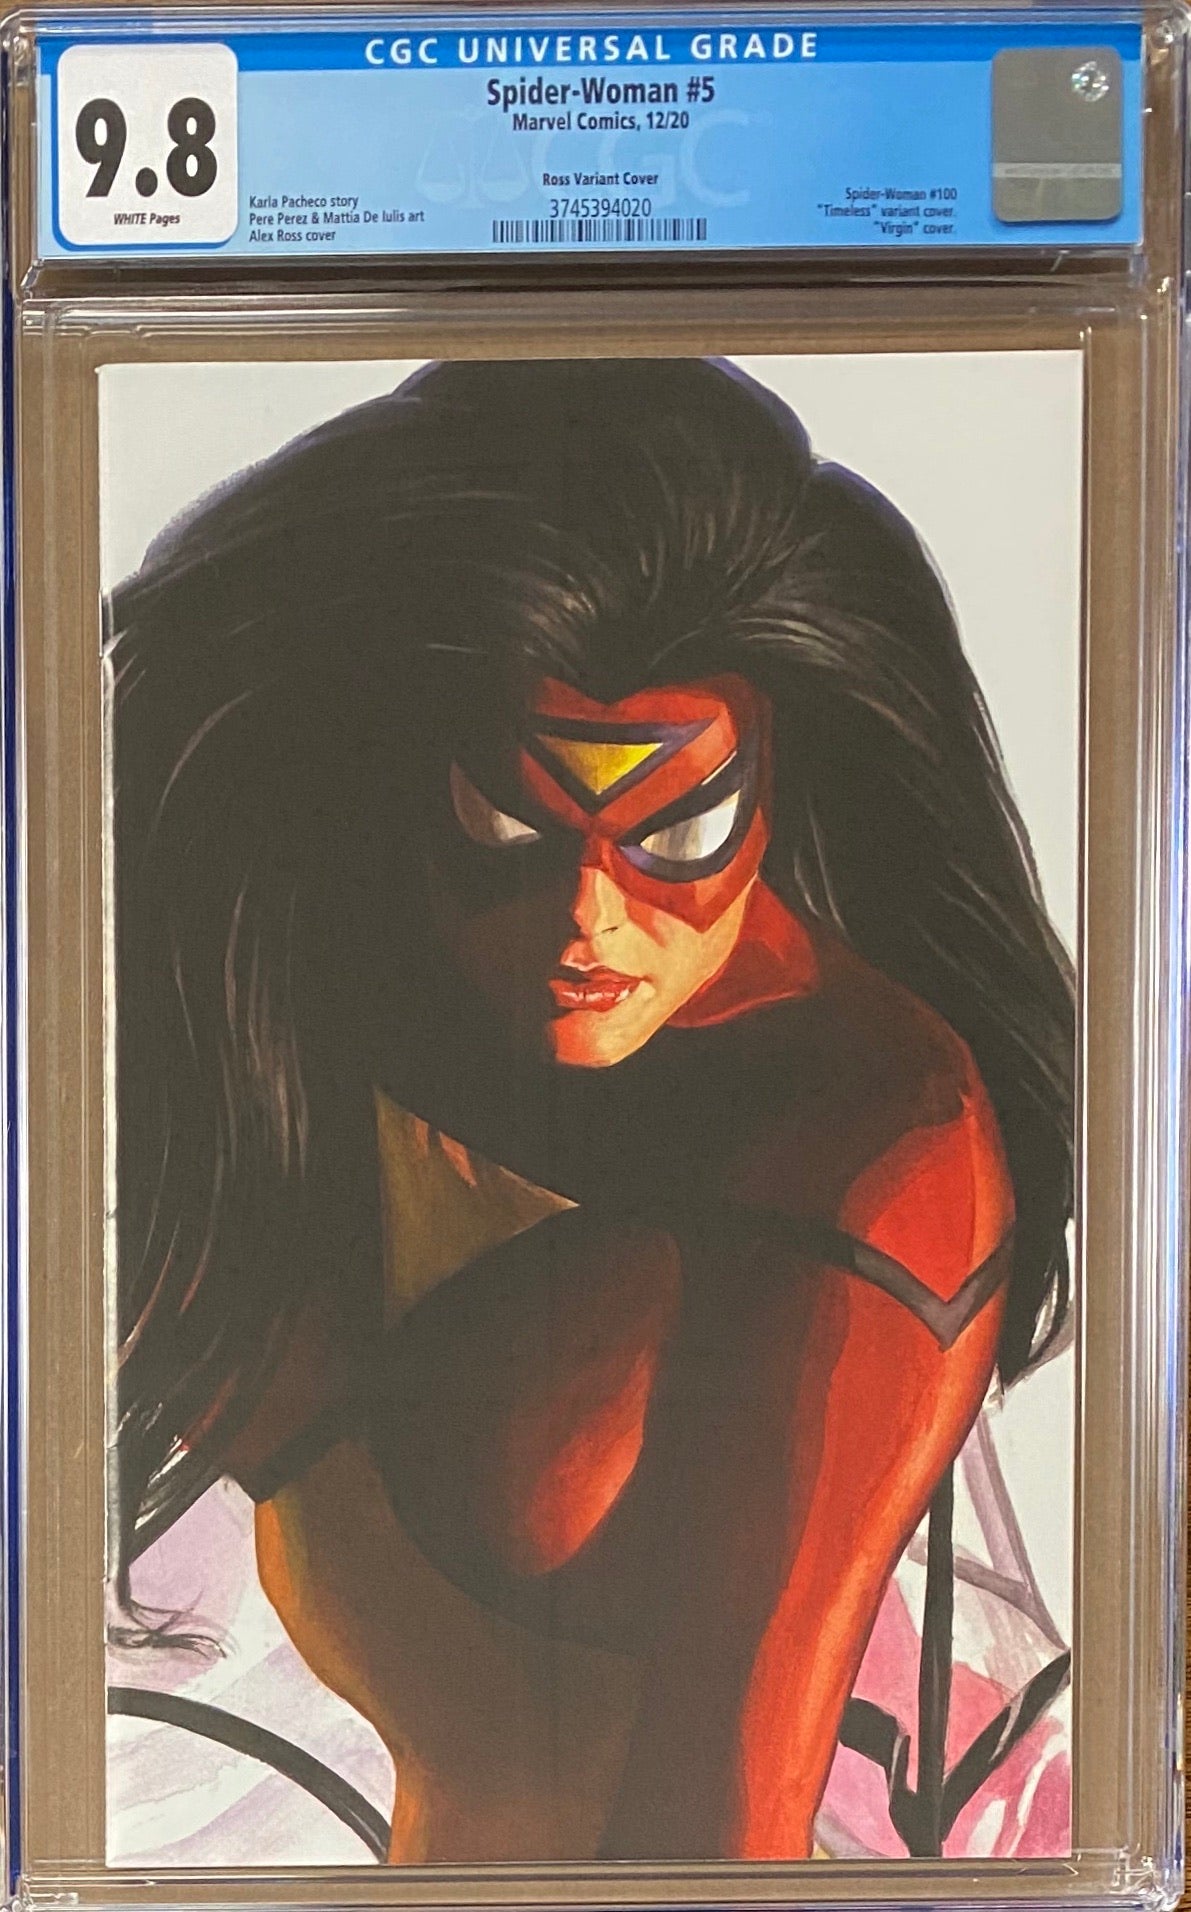 Spider-Woman #5 Alex Ross Spider-Woman "Timeless" Variant CGC 9.8